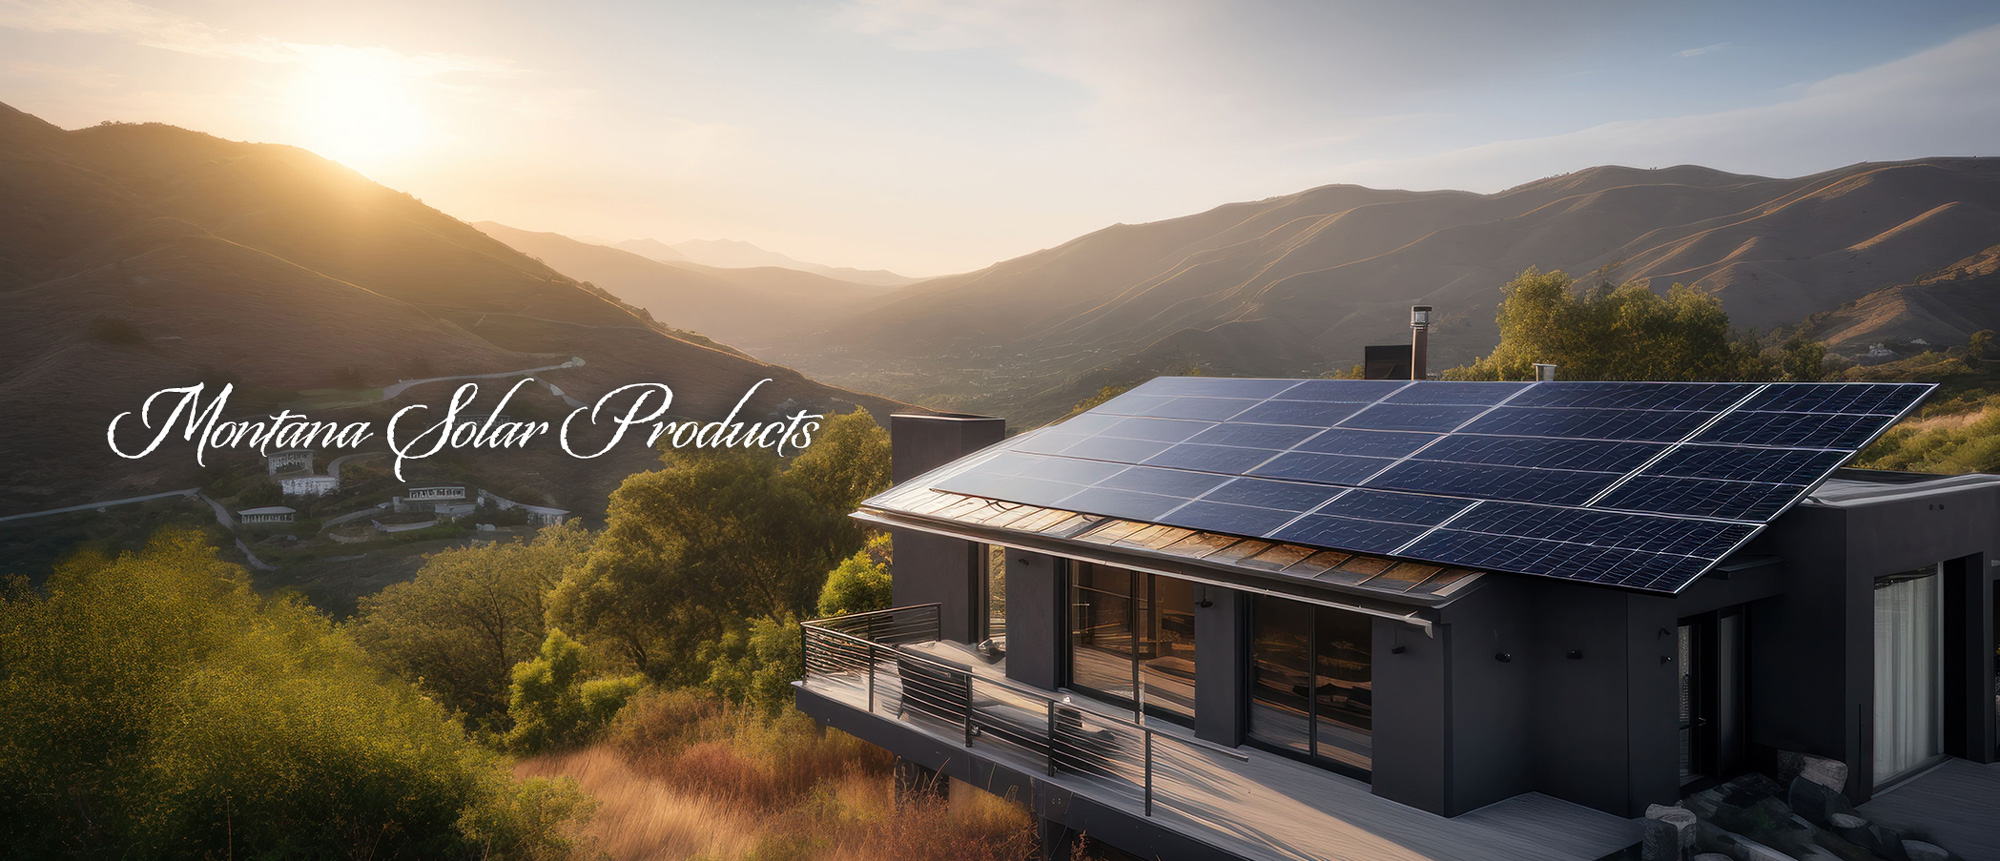 Montana-Solar-Products-Website